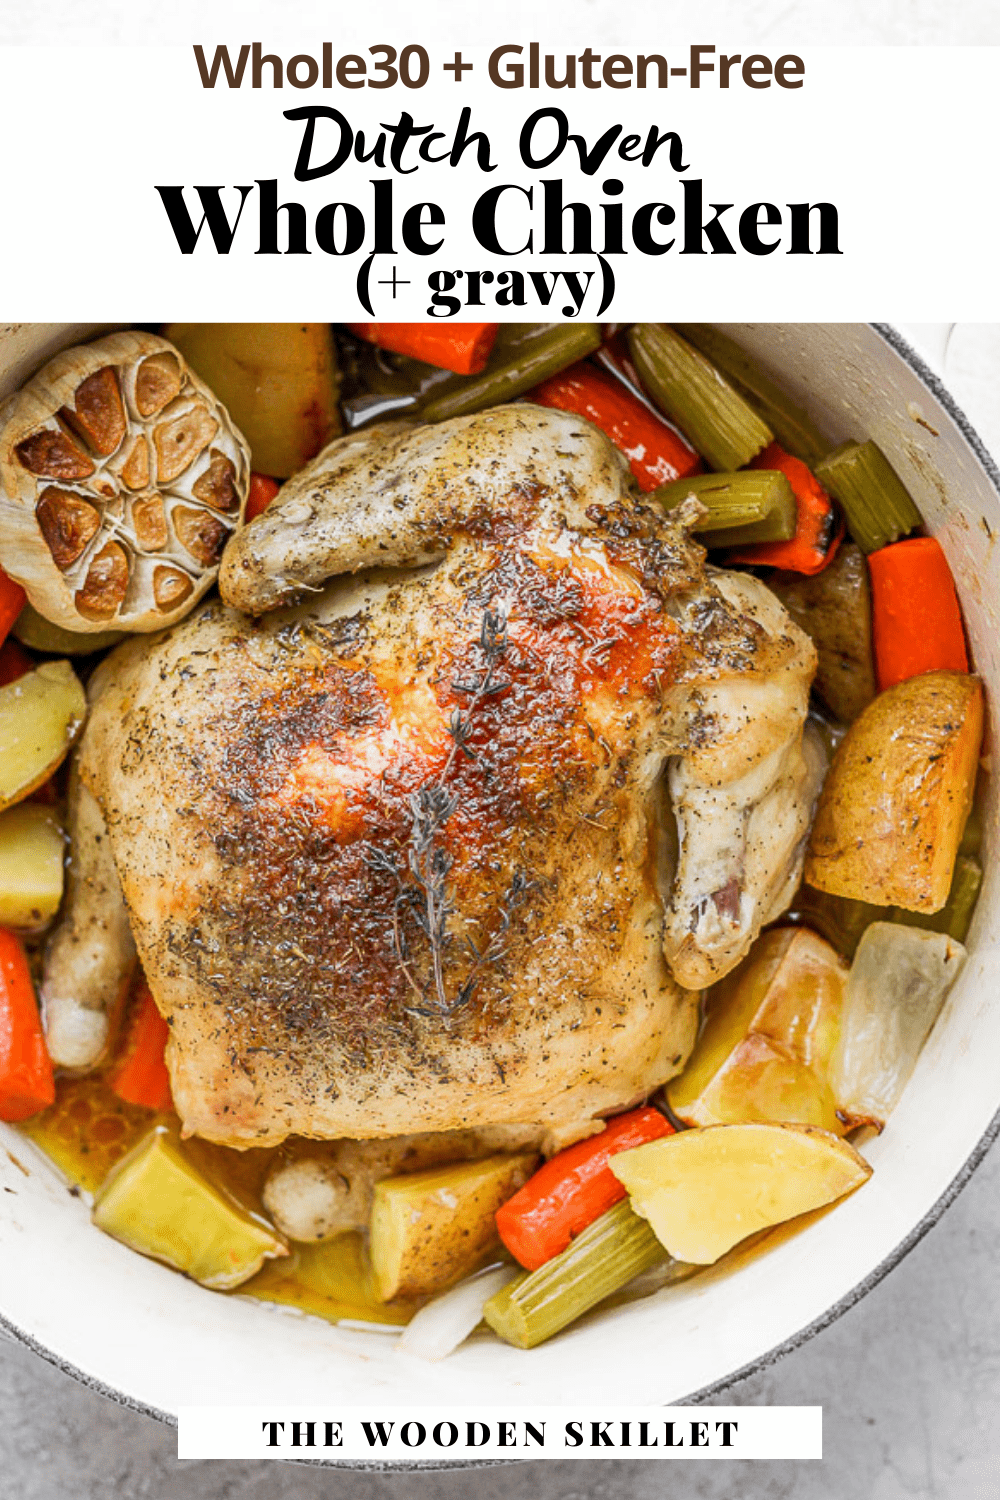 Pinterest image for dutch oven whole chicken.